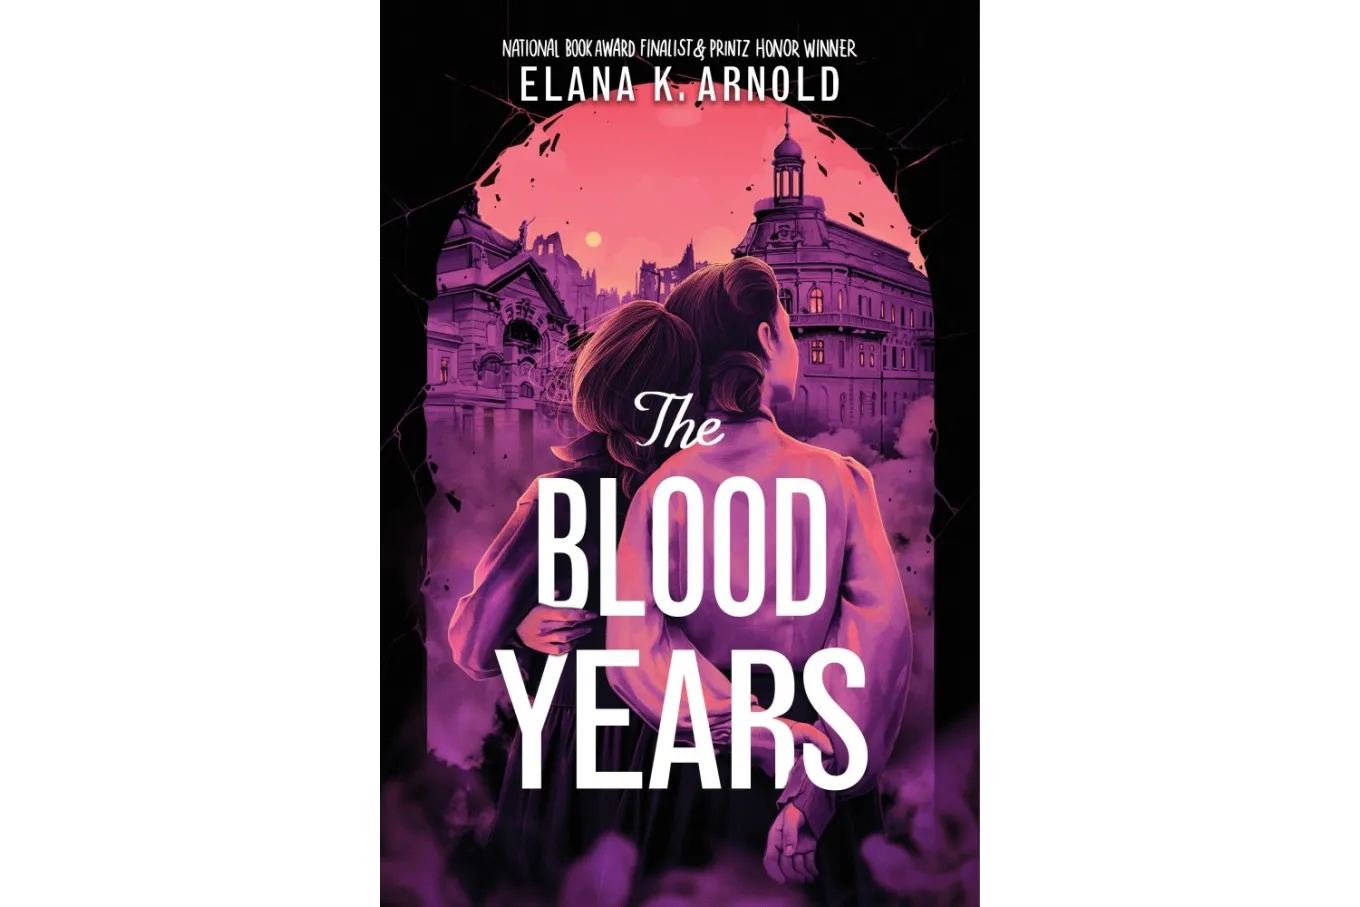 Cover of the Blood Years